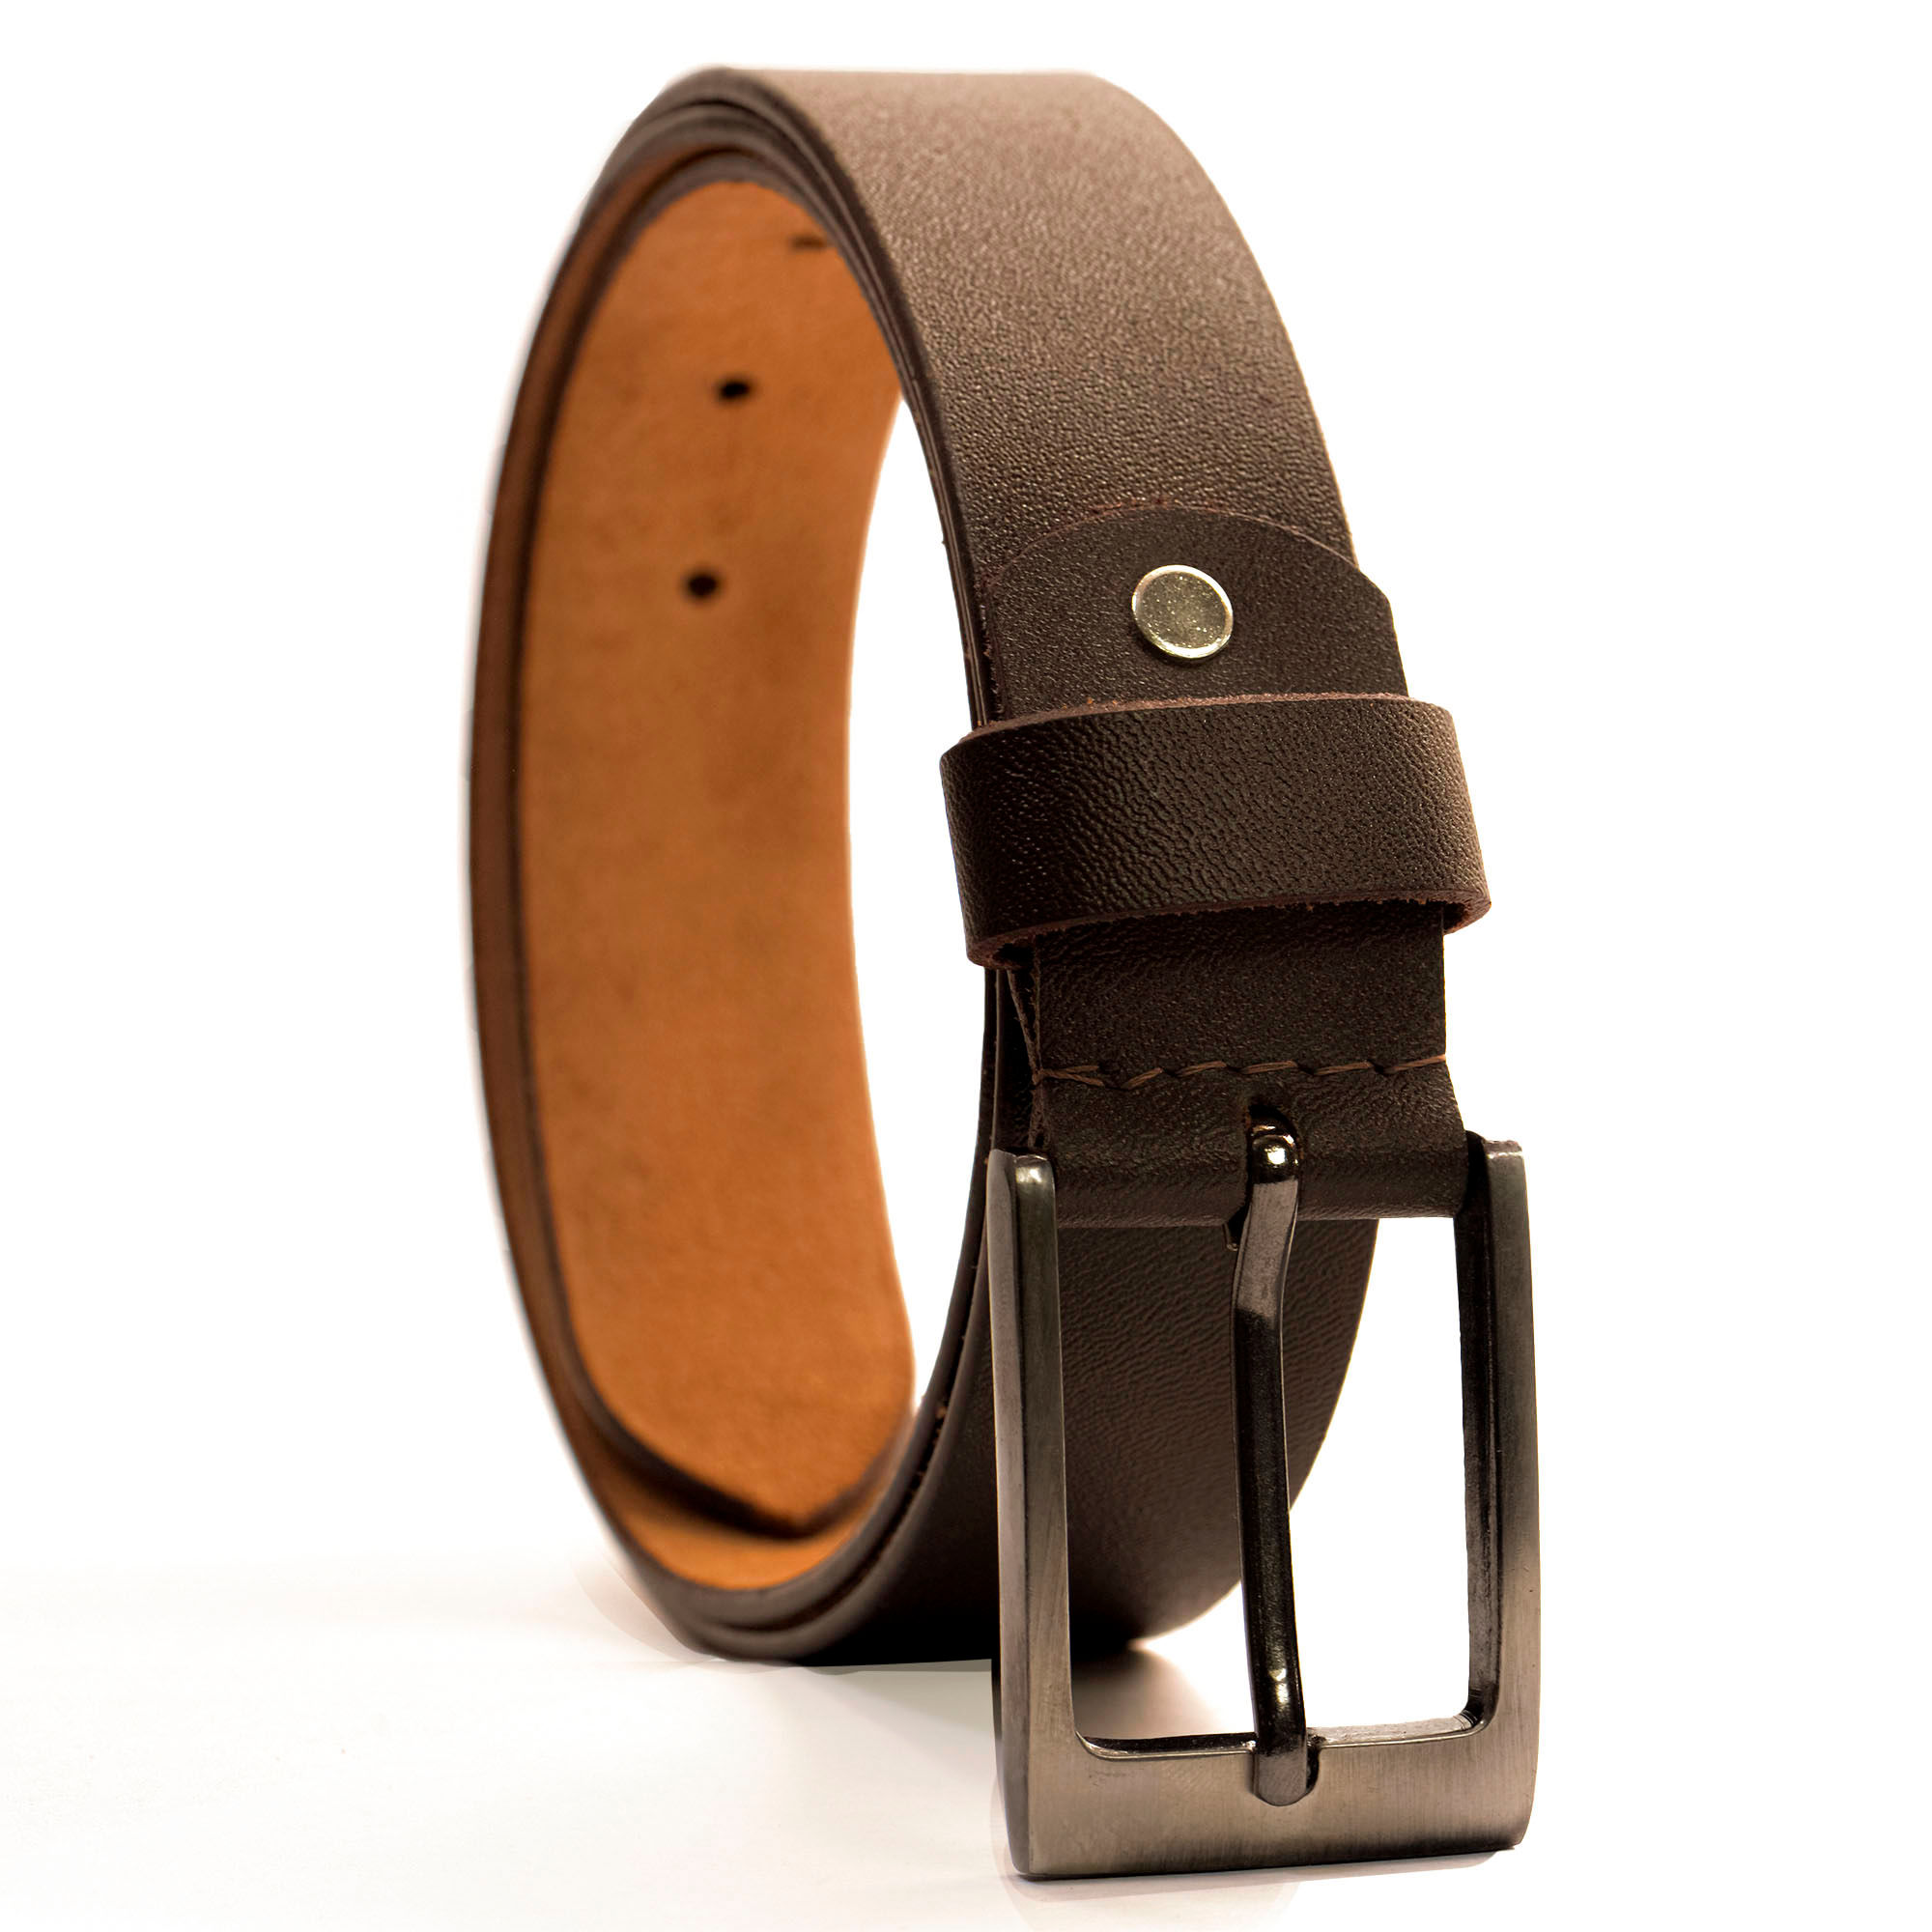 Genuine leather belts pin holde blk